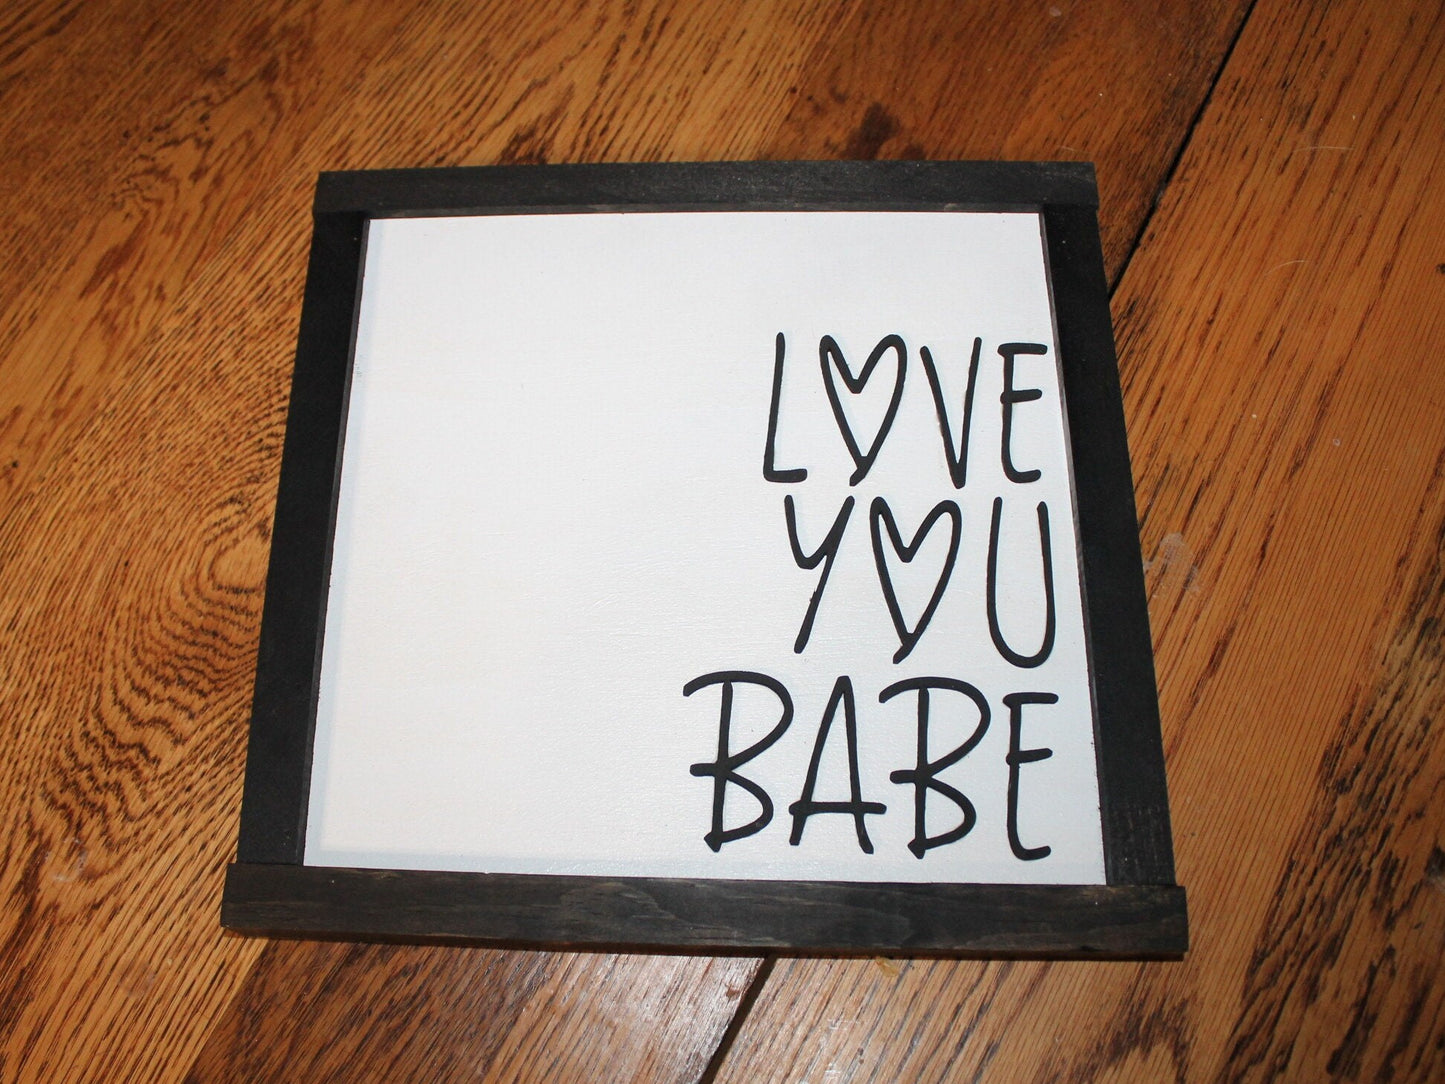 Raised Text Love You Babe Wood Sign Boyfriend Girlfriend Gift 3D Hearts Loved One Wooden Sign Wood Primitive Shabby Chic Wall Decor